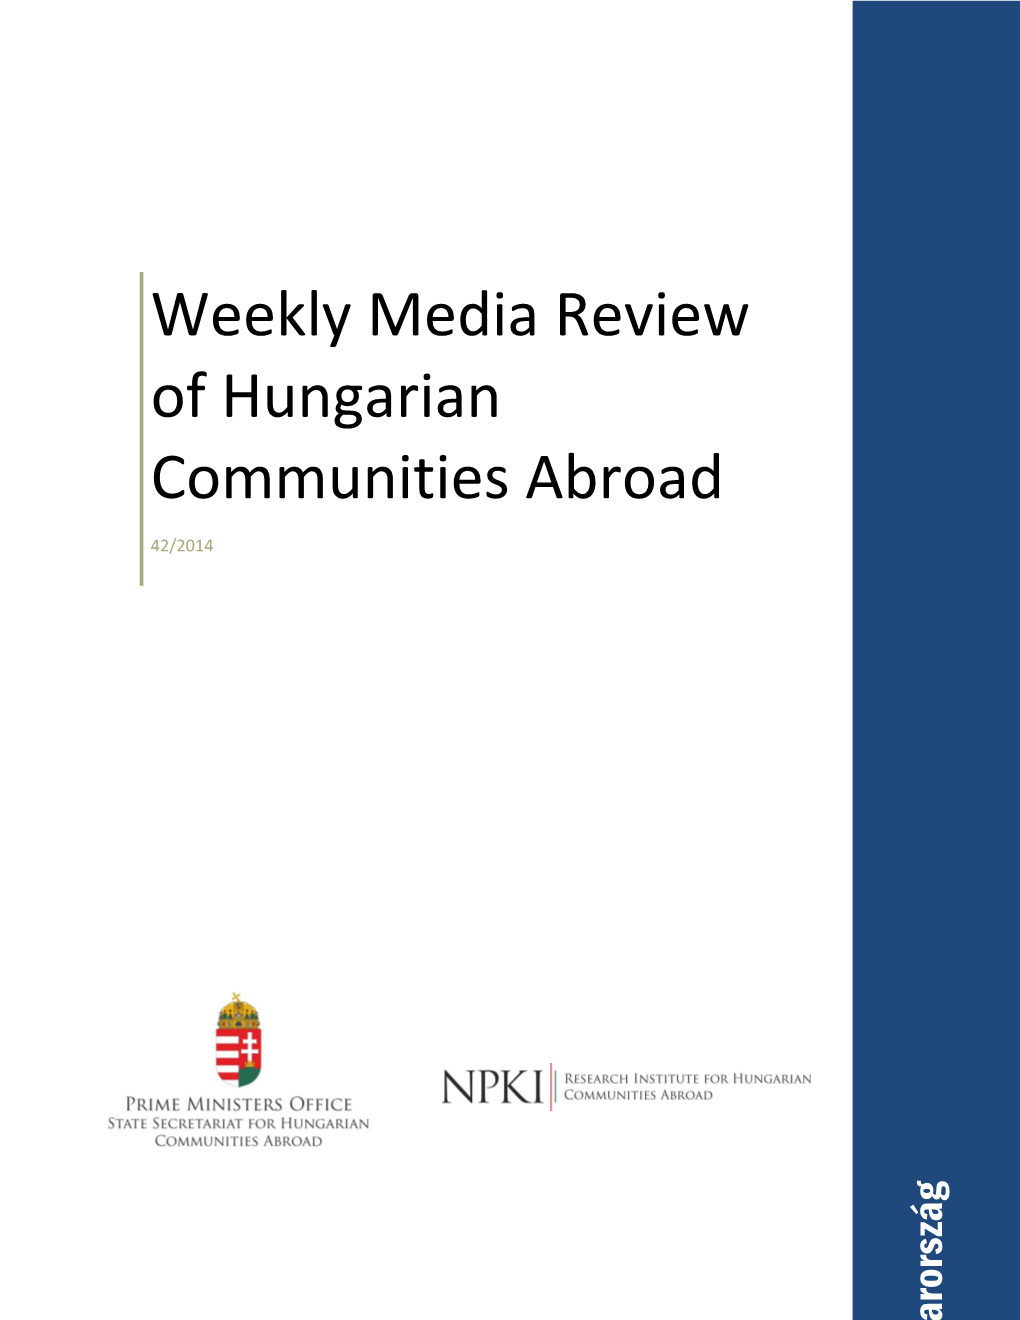 Weekly Media Review of Hungarian Communities Abroad